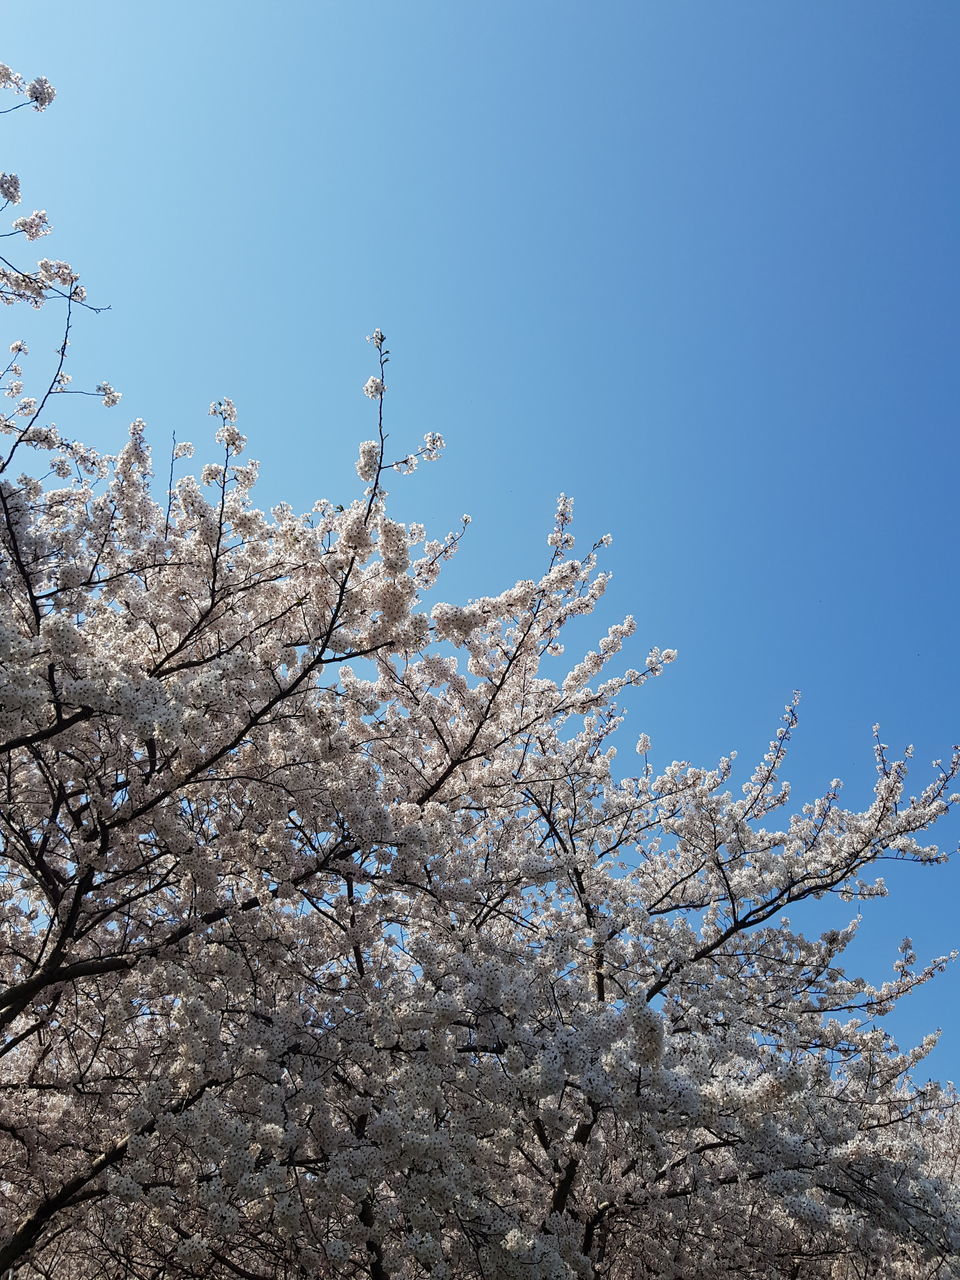 LOW ANGLE VIEW OF CHERRY BLOSSOM AGAINST CLEAR BLUE SKY